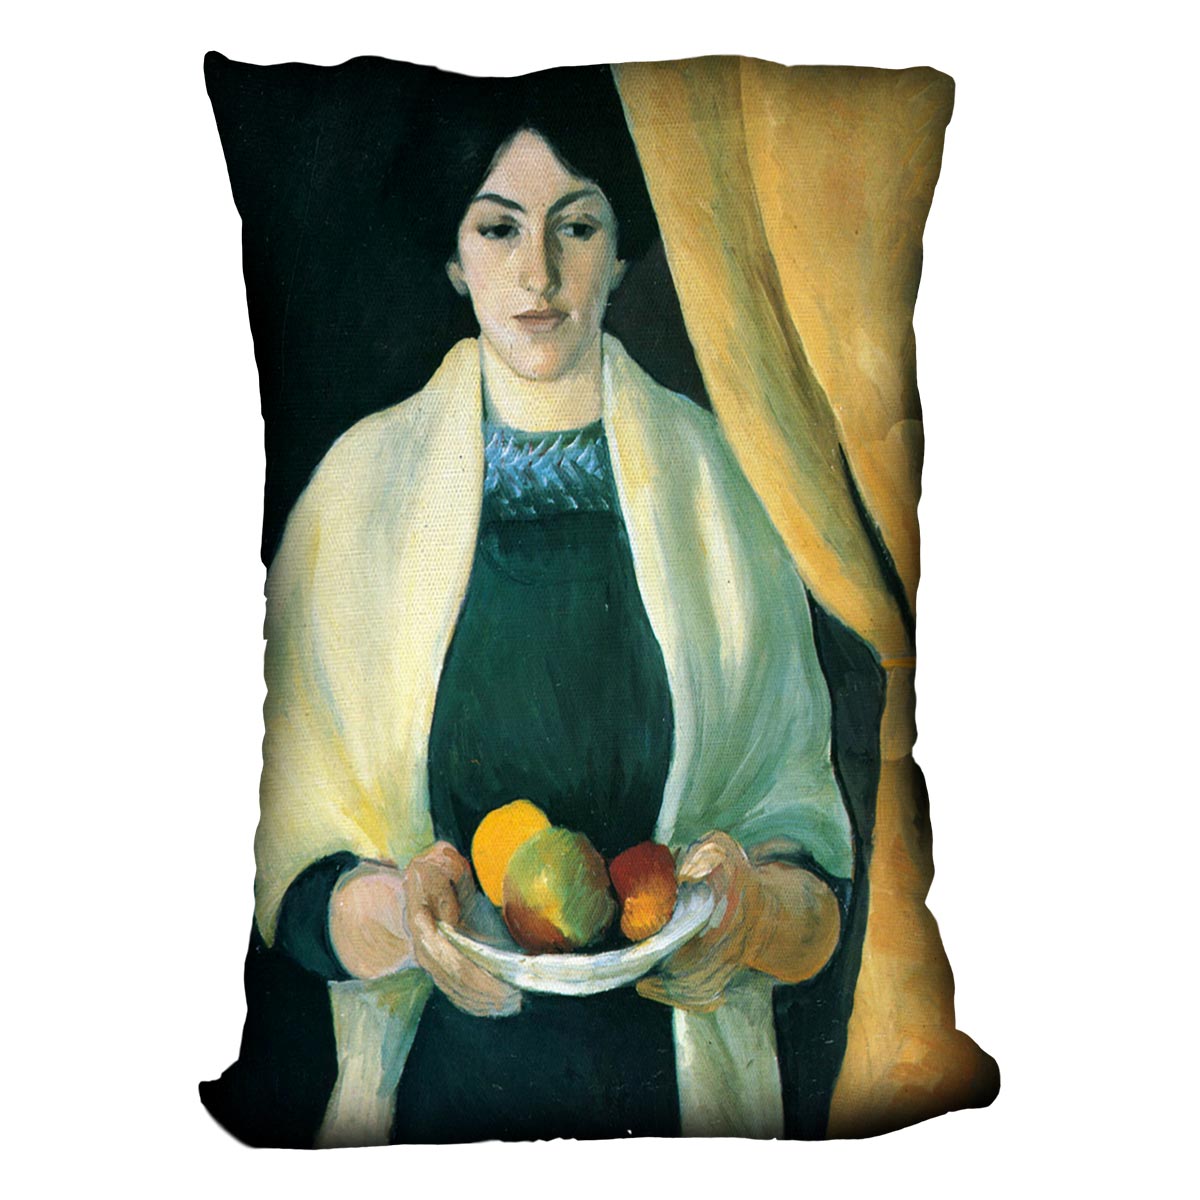 Portrait with apples portrait of the wife of the artist by Macke Cushion - Canvas Art Rocks - 4